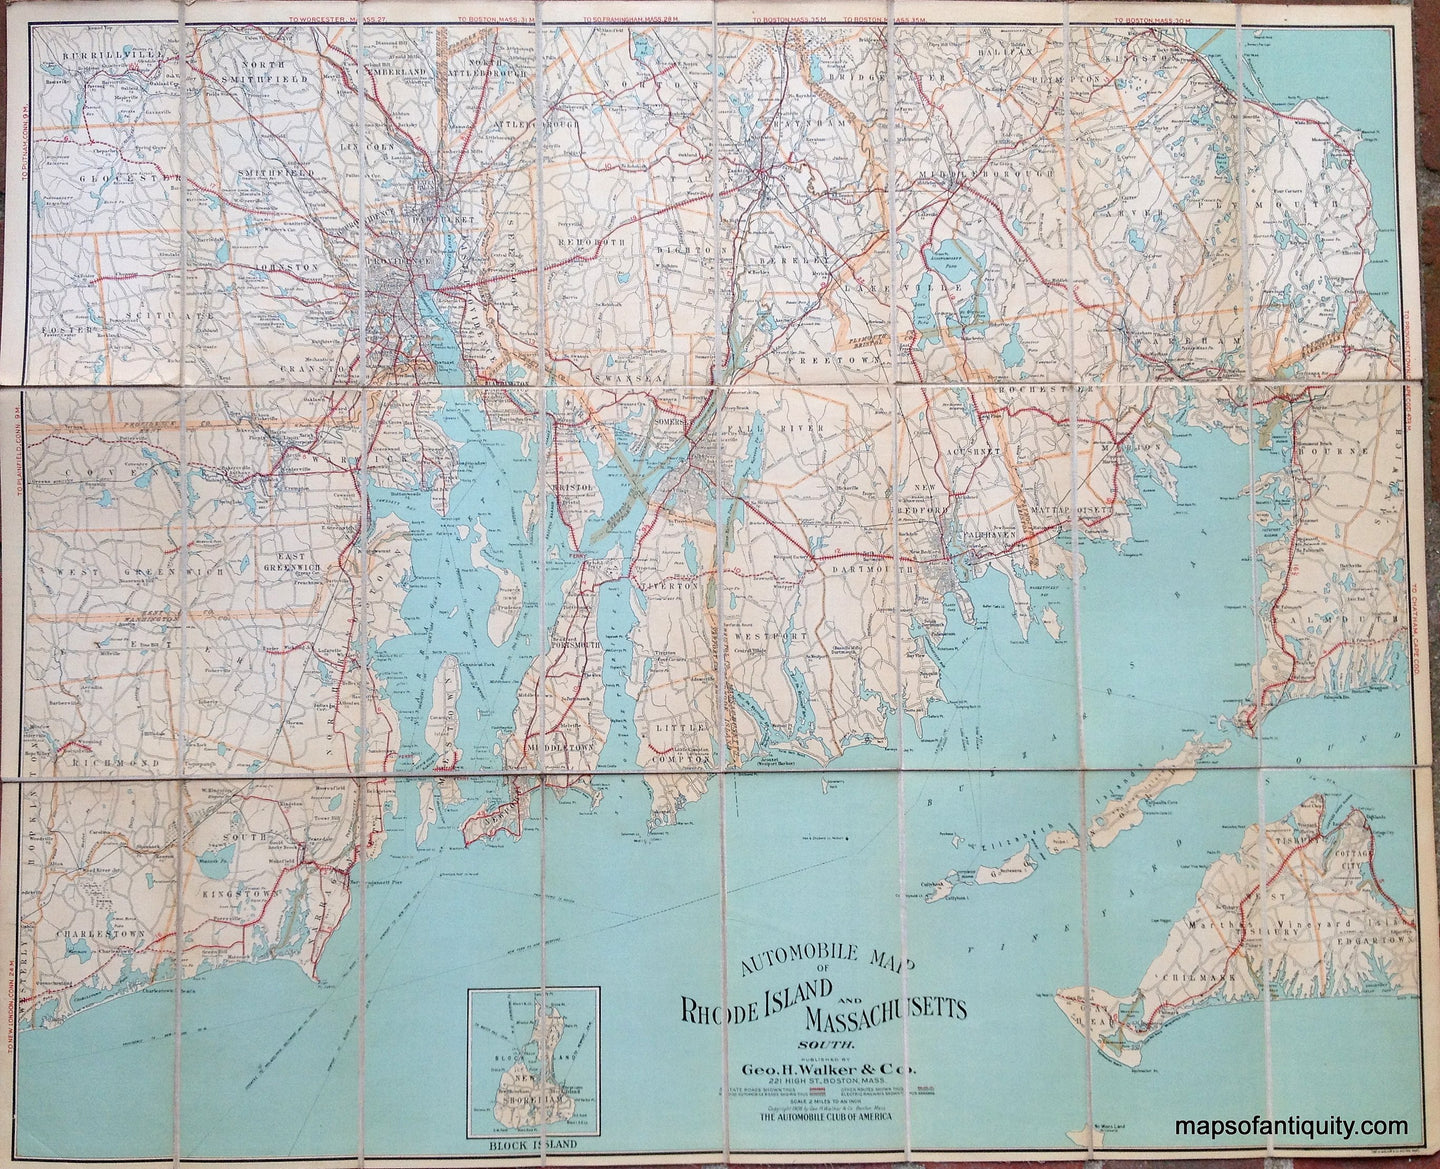 Antique-Road-Map-Automobile-Map-of-Rhode-Island-and-Massachusetts-South-Rhode-Island-Road-Maps-1906-Walker-Maps-Of-Antiquity